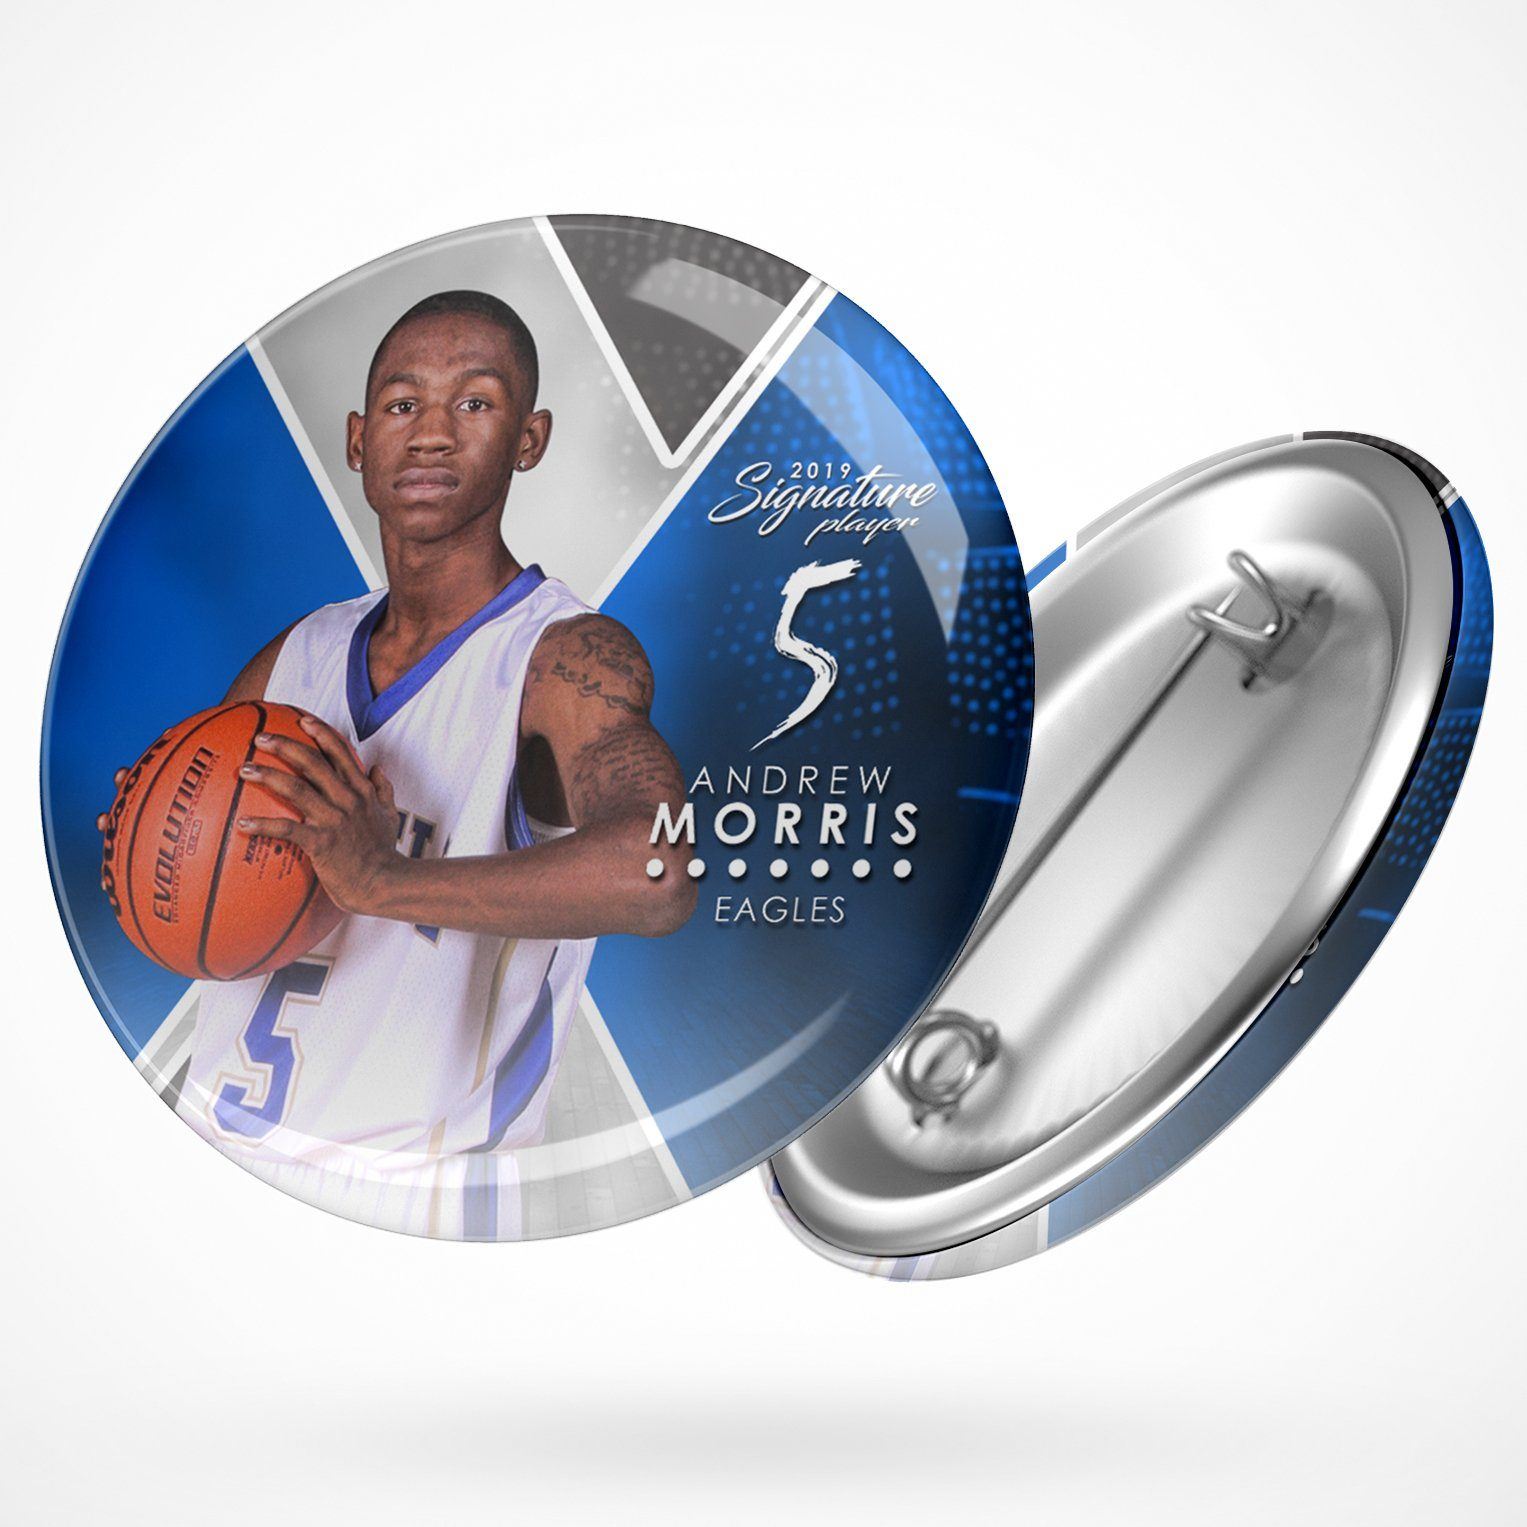 Signature Player - Basketball - V2 - Extraction Button Template-Photoshop Template - Photo Solutions